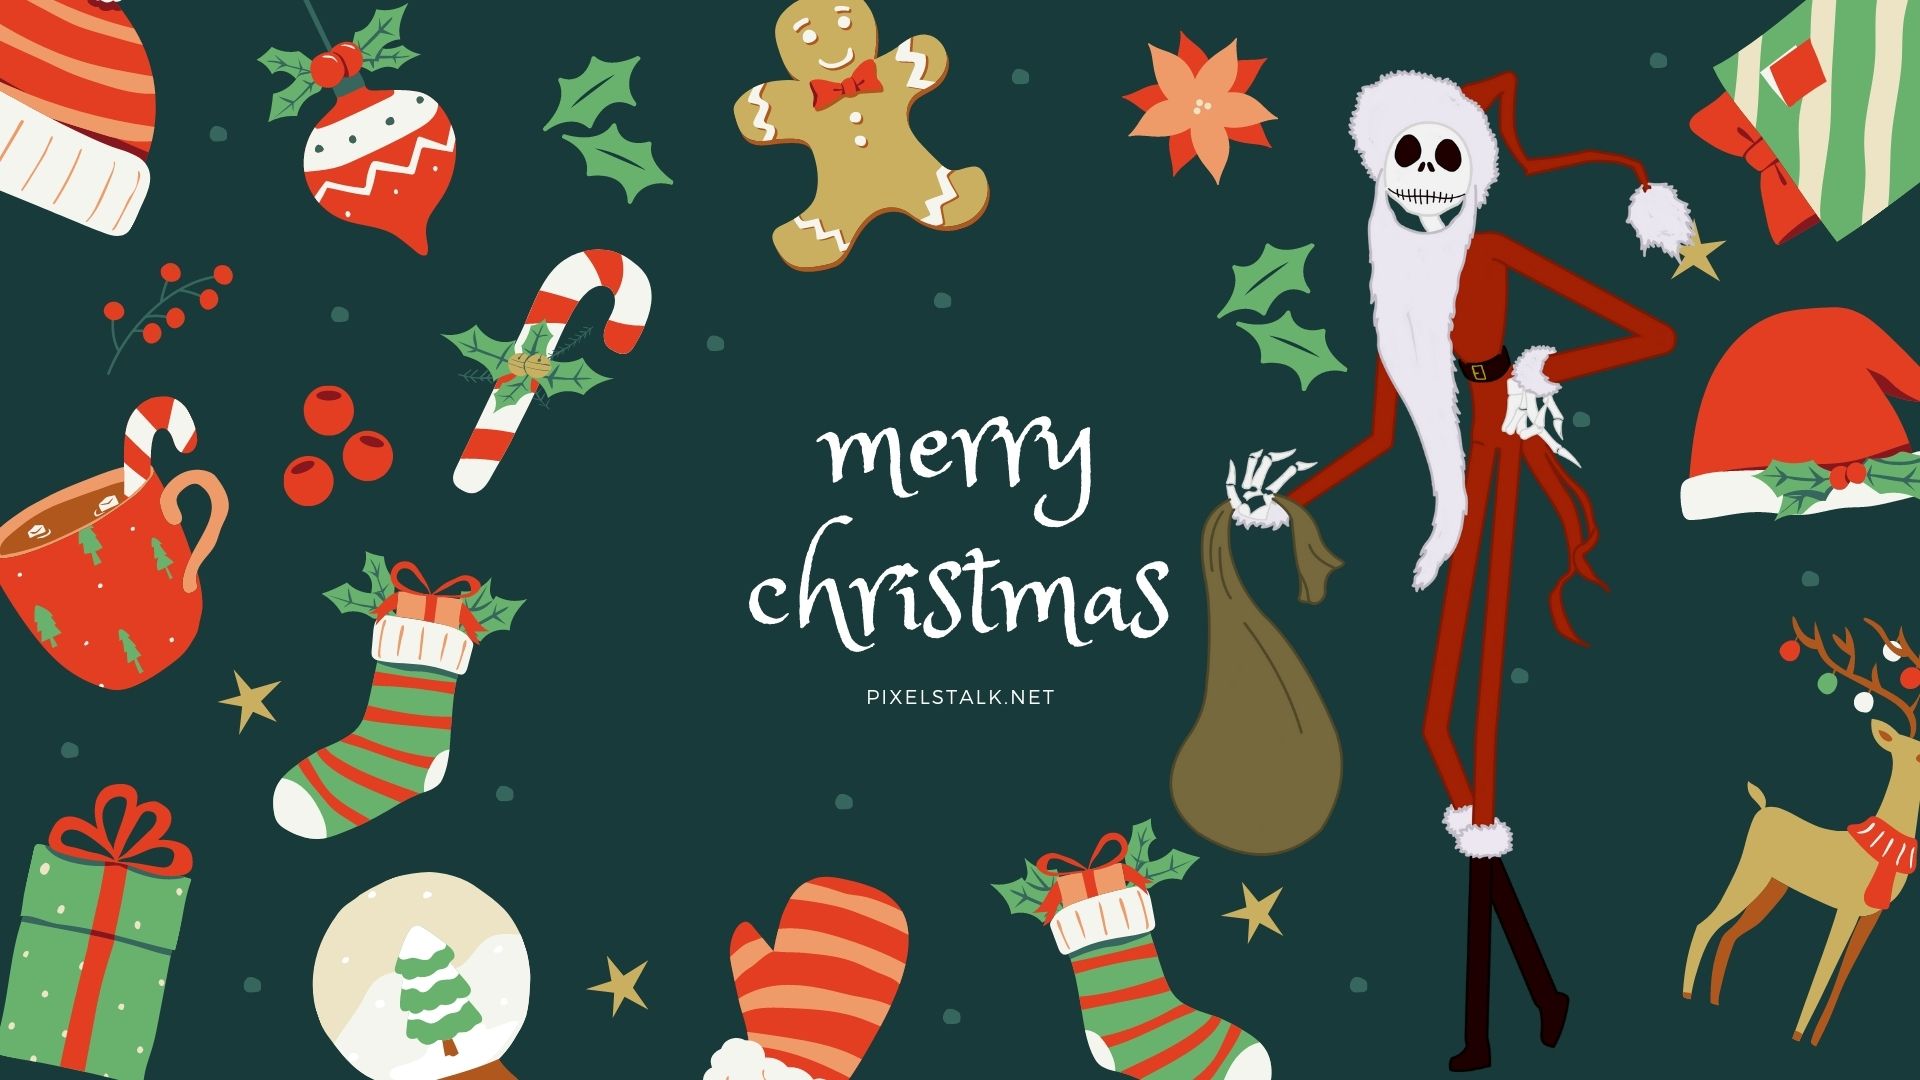 Mobile wallpaper Movie The Nightmare Before Christmas Jack The Nightmare  Before Christmas 1498398 download the picture for free